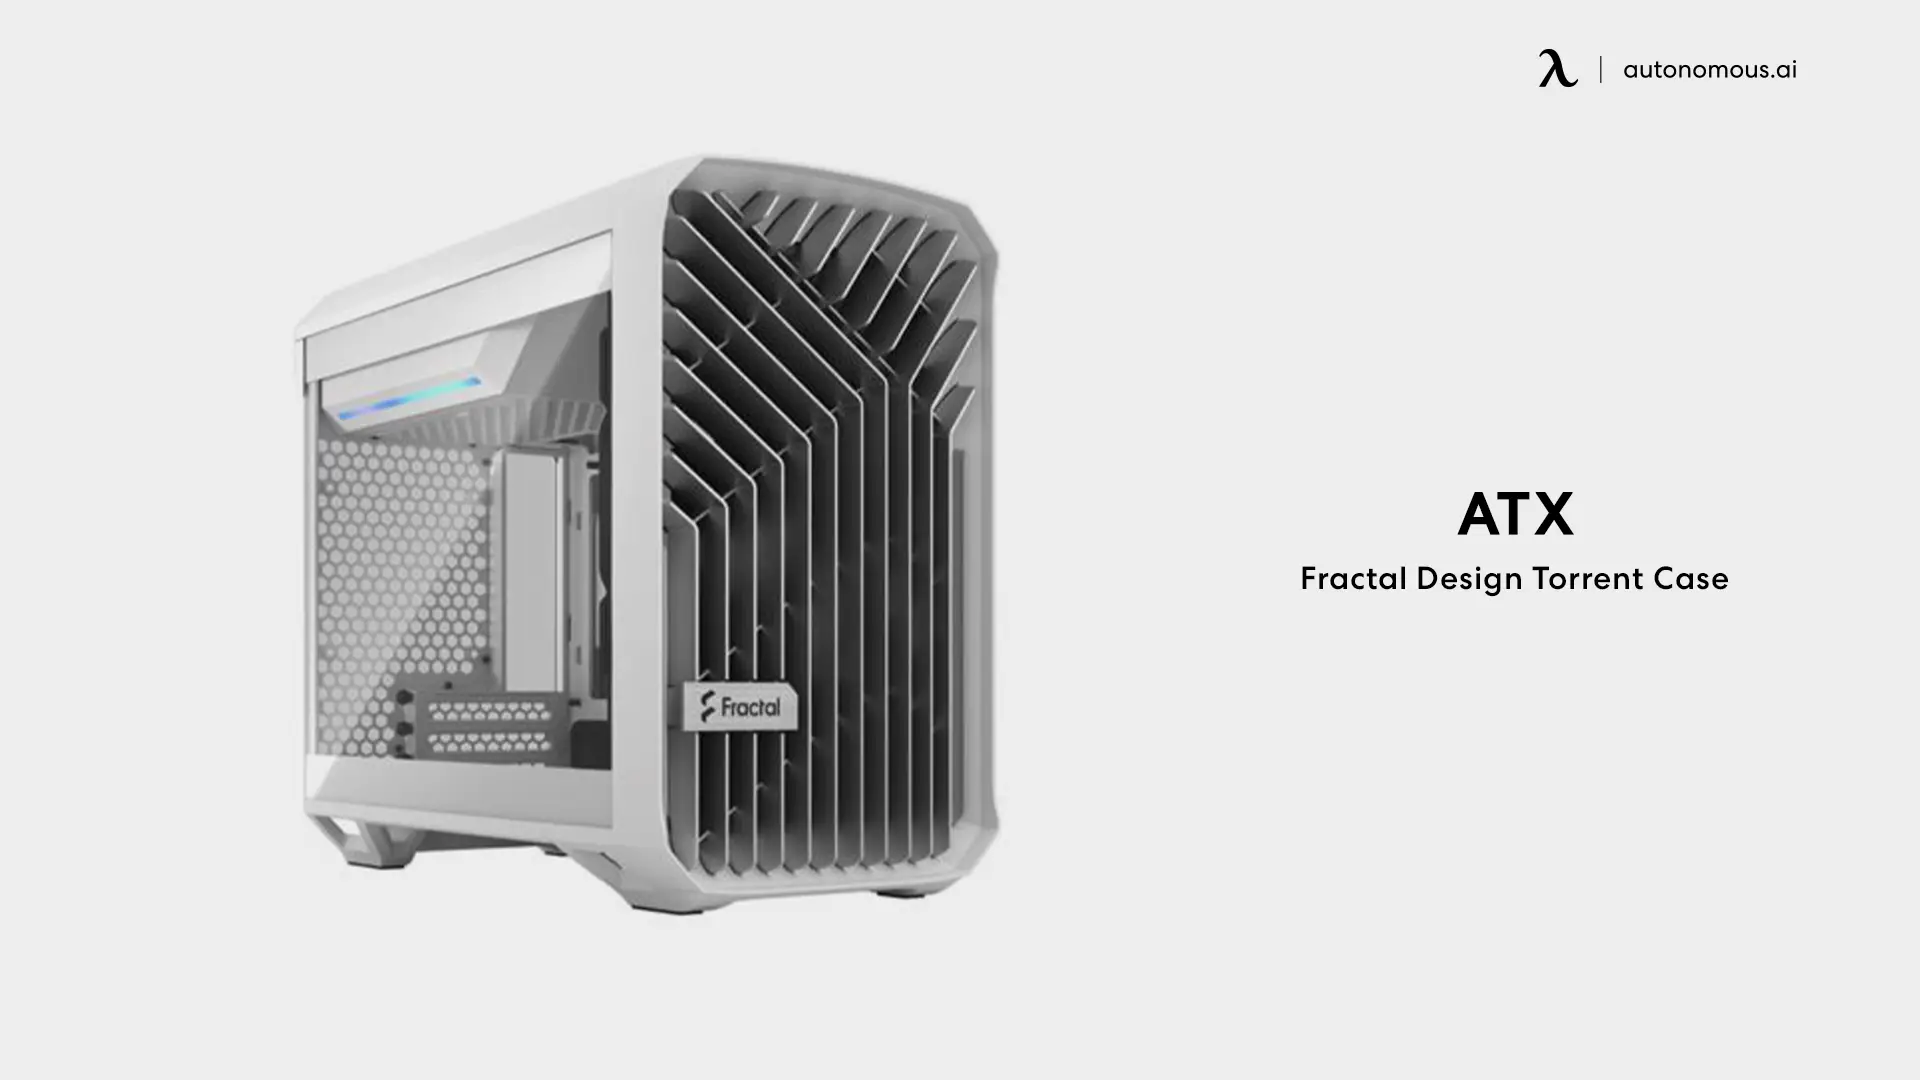 Fractal Design Torrent case from ATX for all white pc build